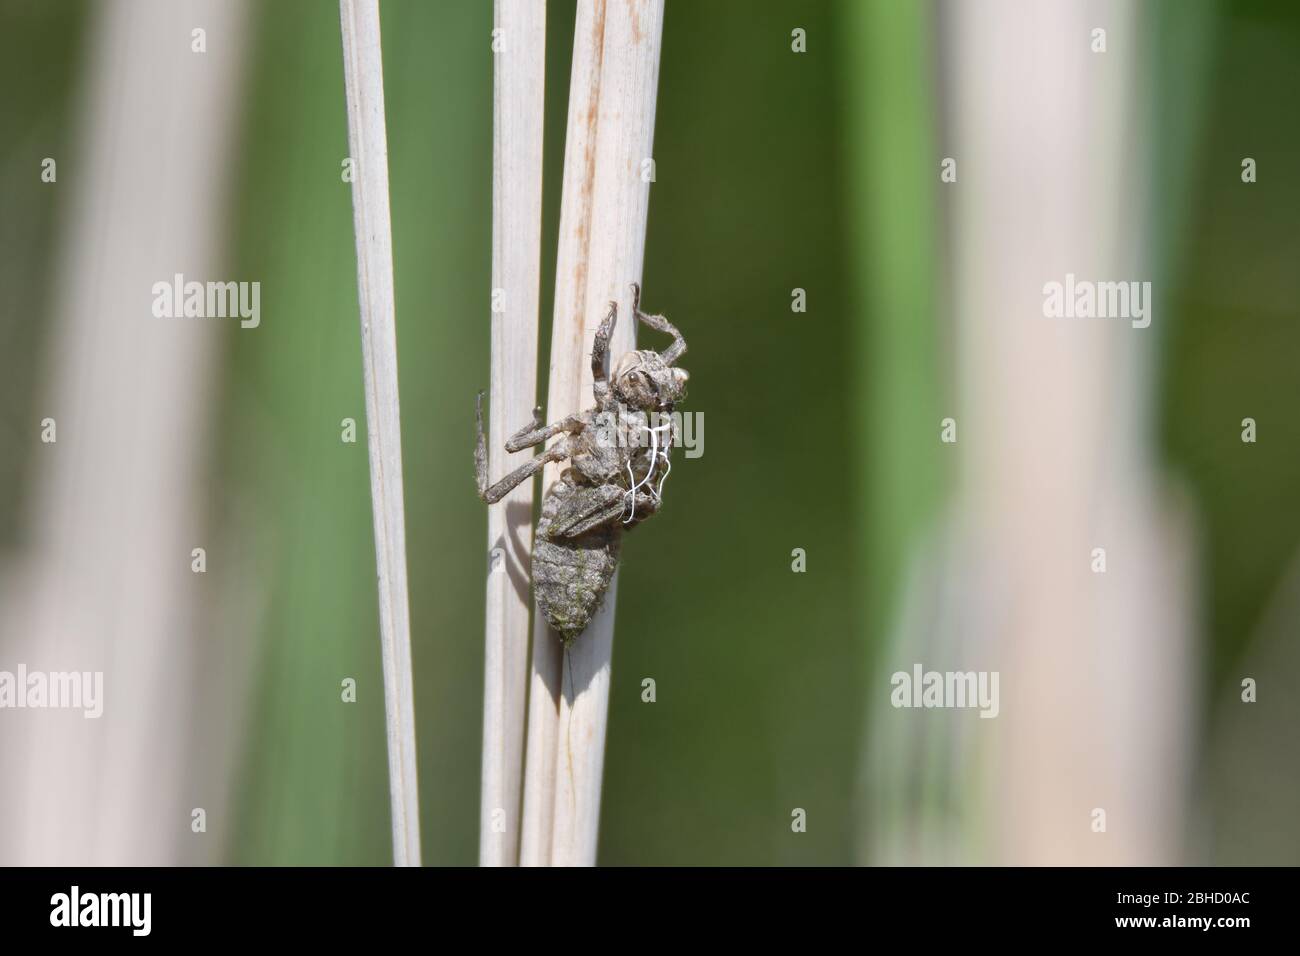 Nymph skin abandoned on a reed after the dragonfly inside broke out and flew away. Pond reeds. Lifecycle. Stock Photo